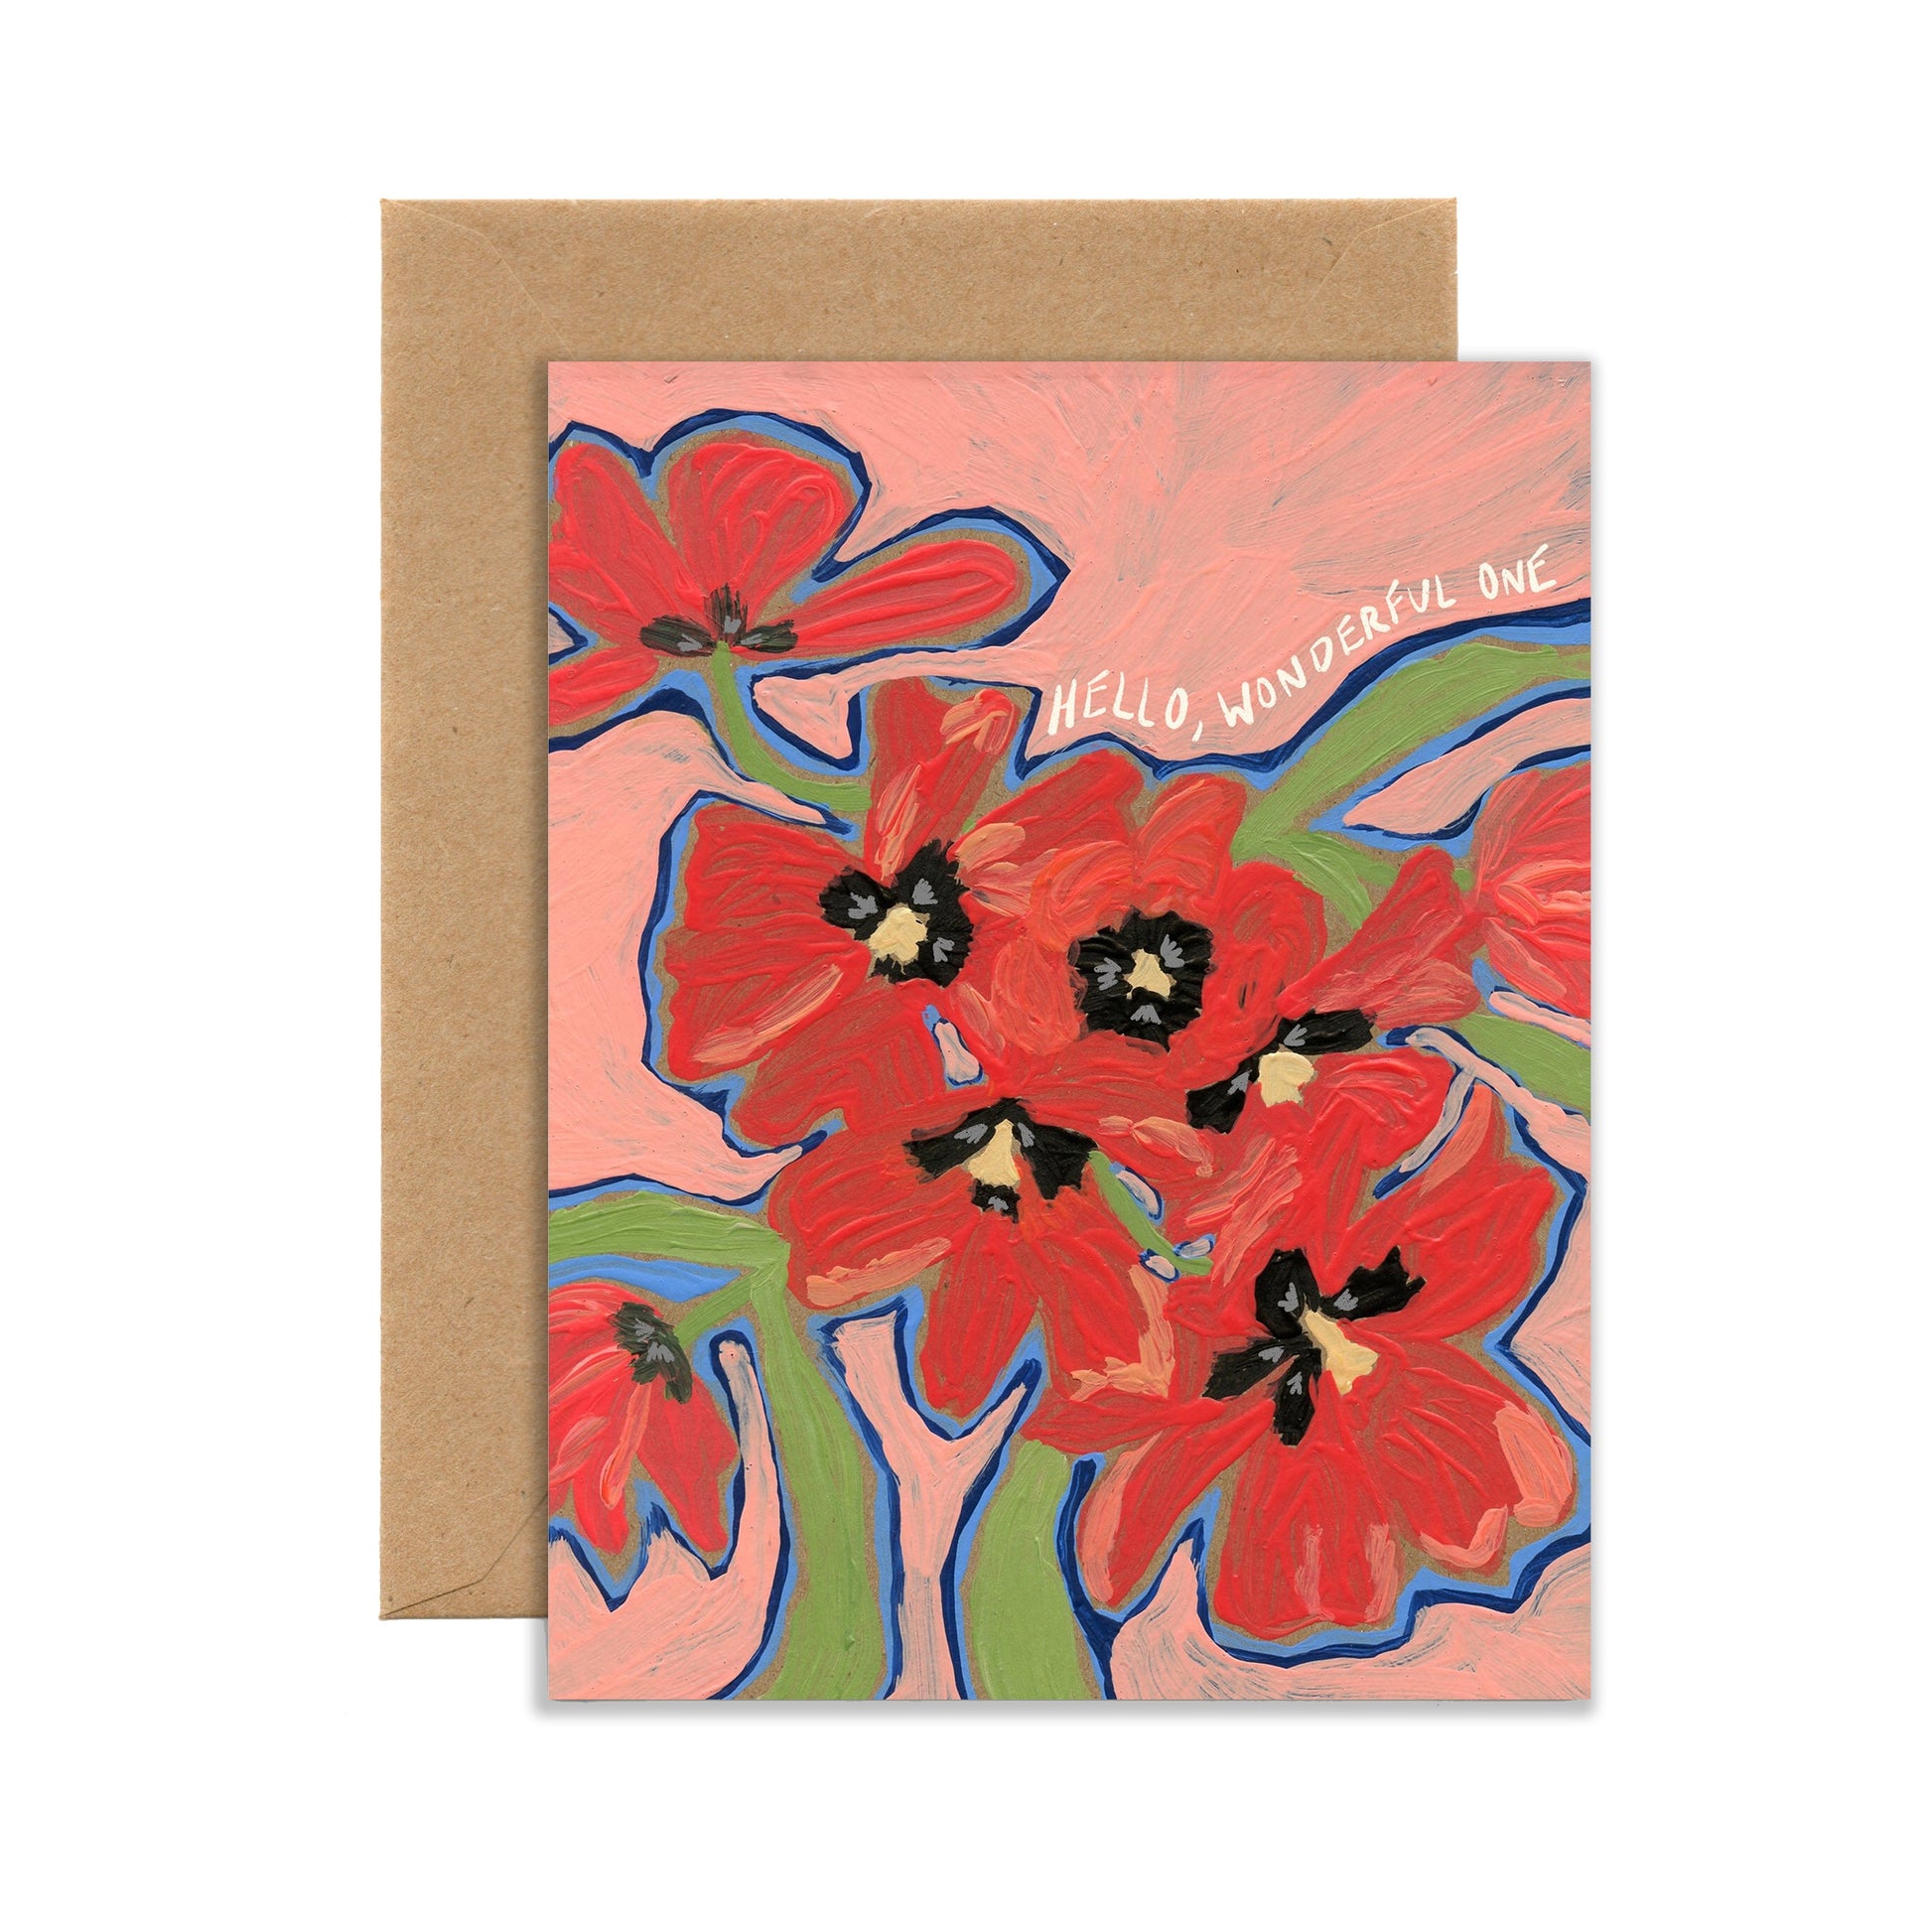 Hello, Wonderful One Tulip Bouquet (Single Card) A2 Card Tiny and Snail